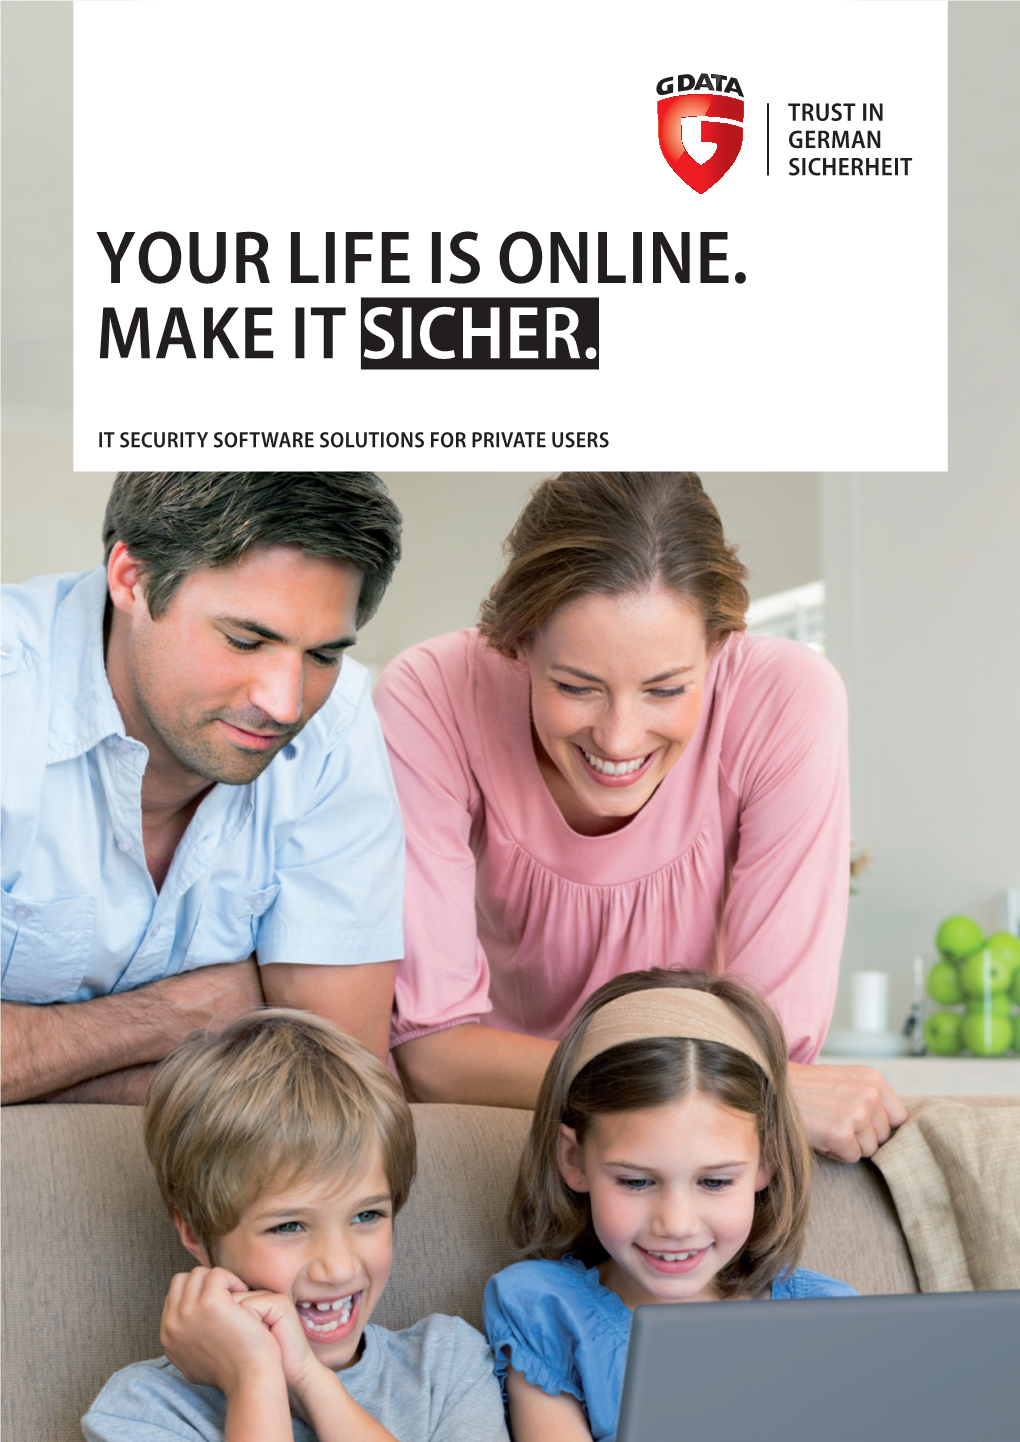 Your Life Is Online. Make It Sicher